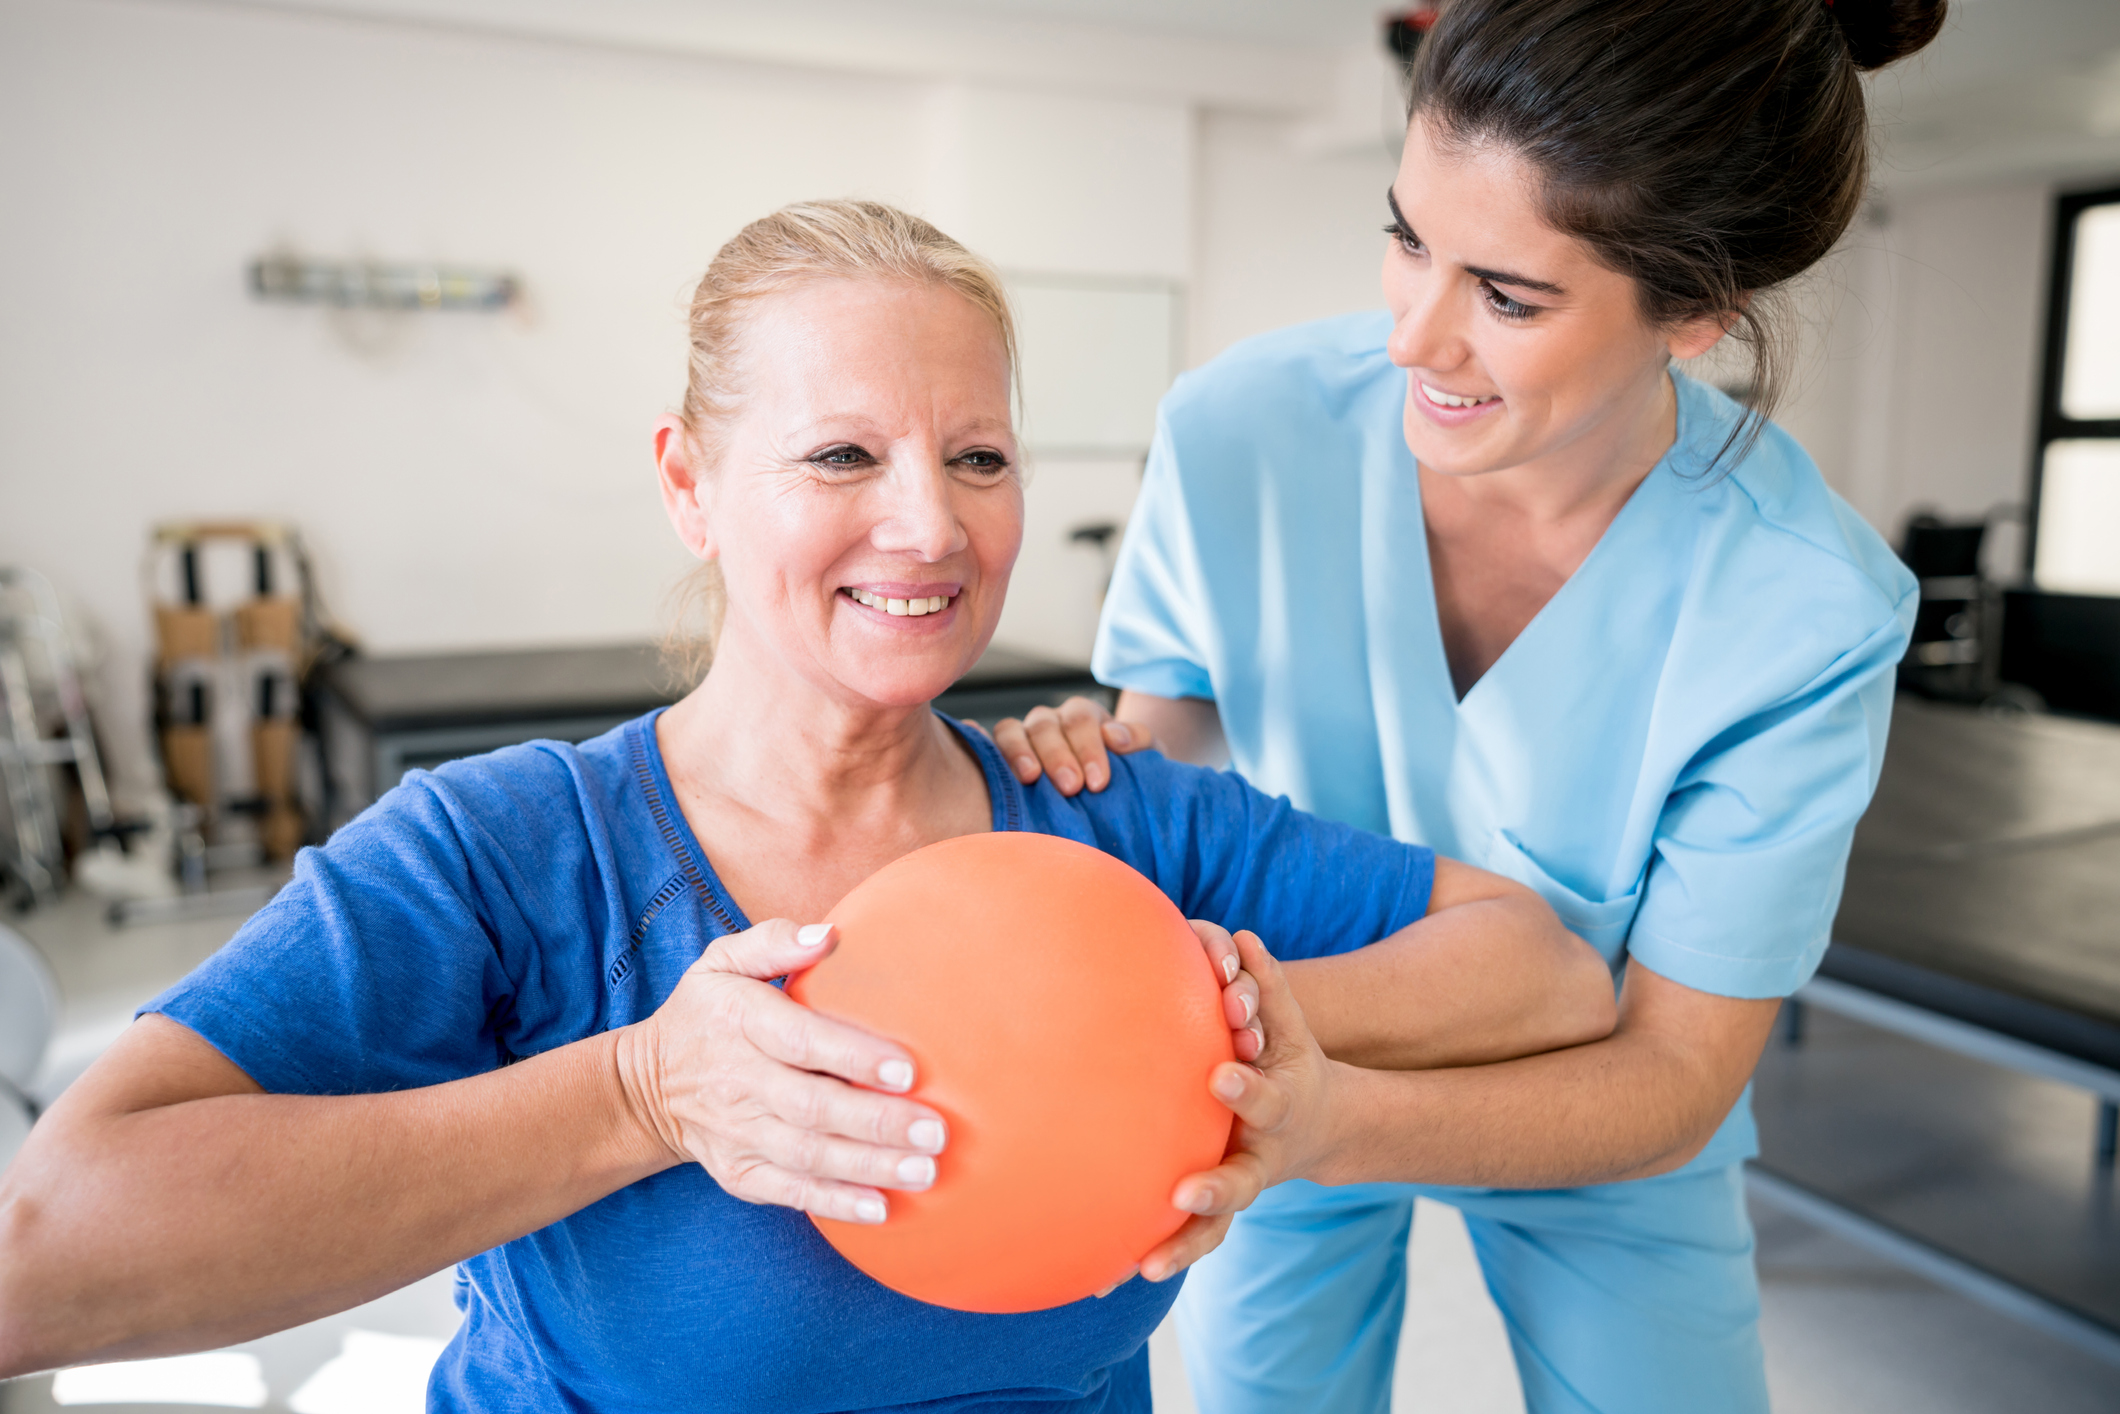 What is the role of occupational therapy in physical activity?